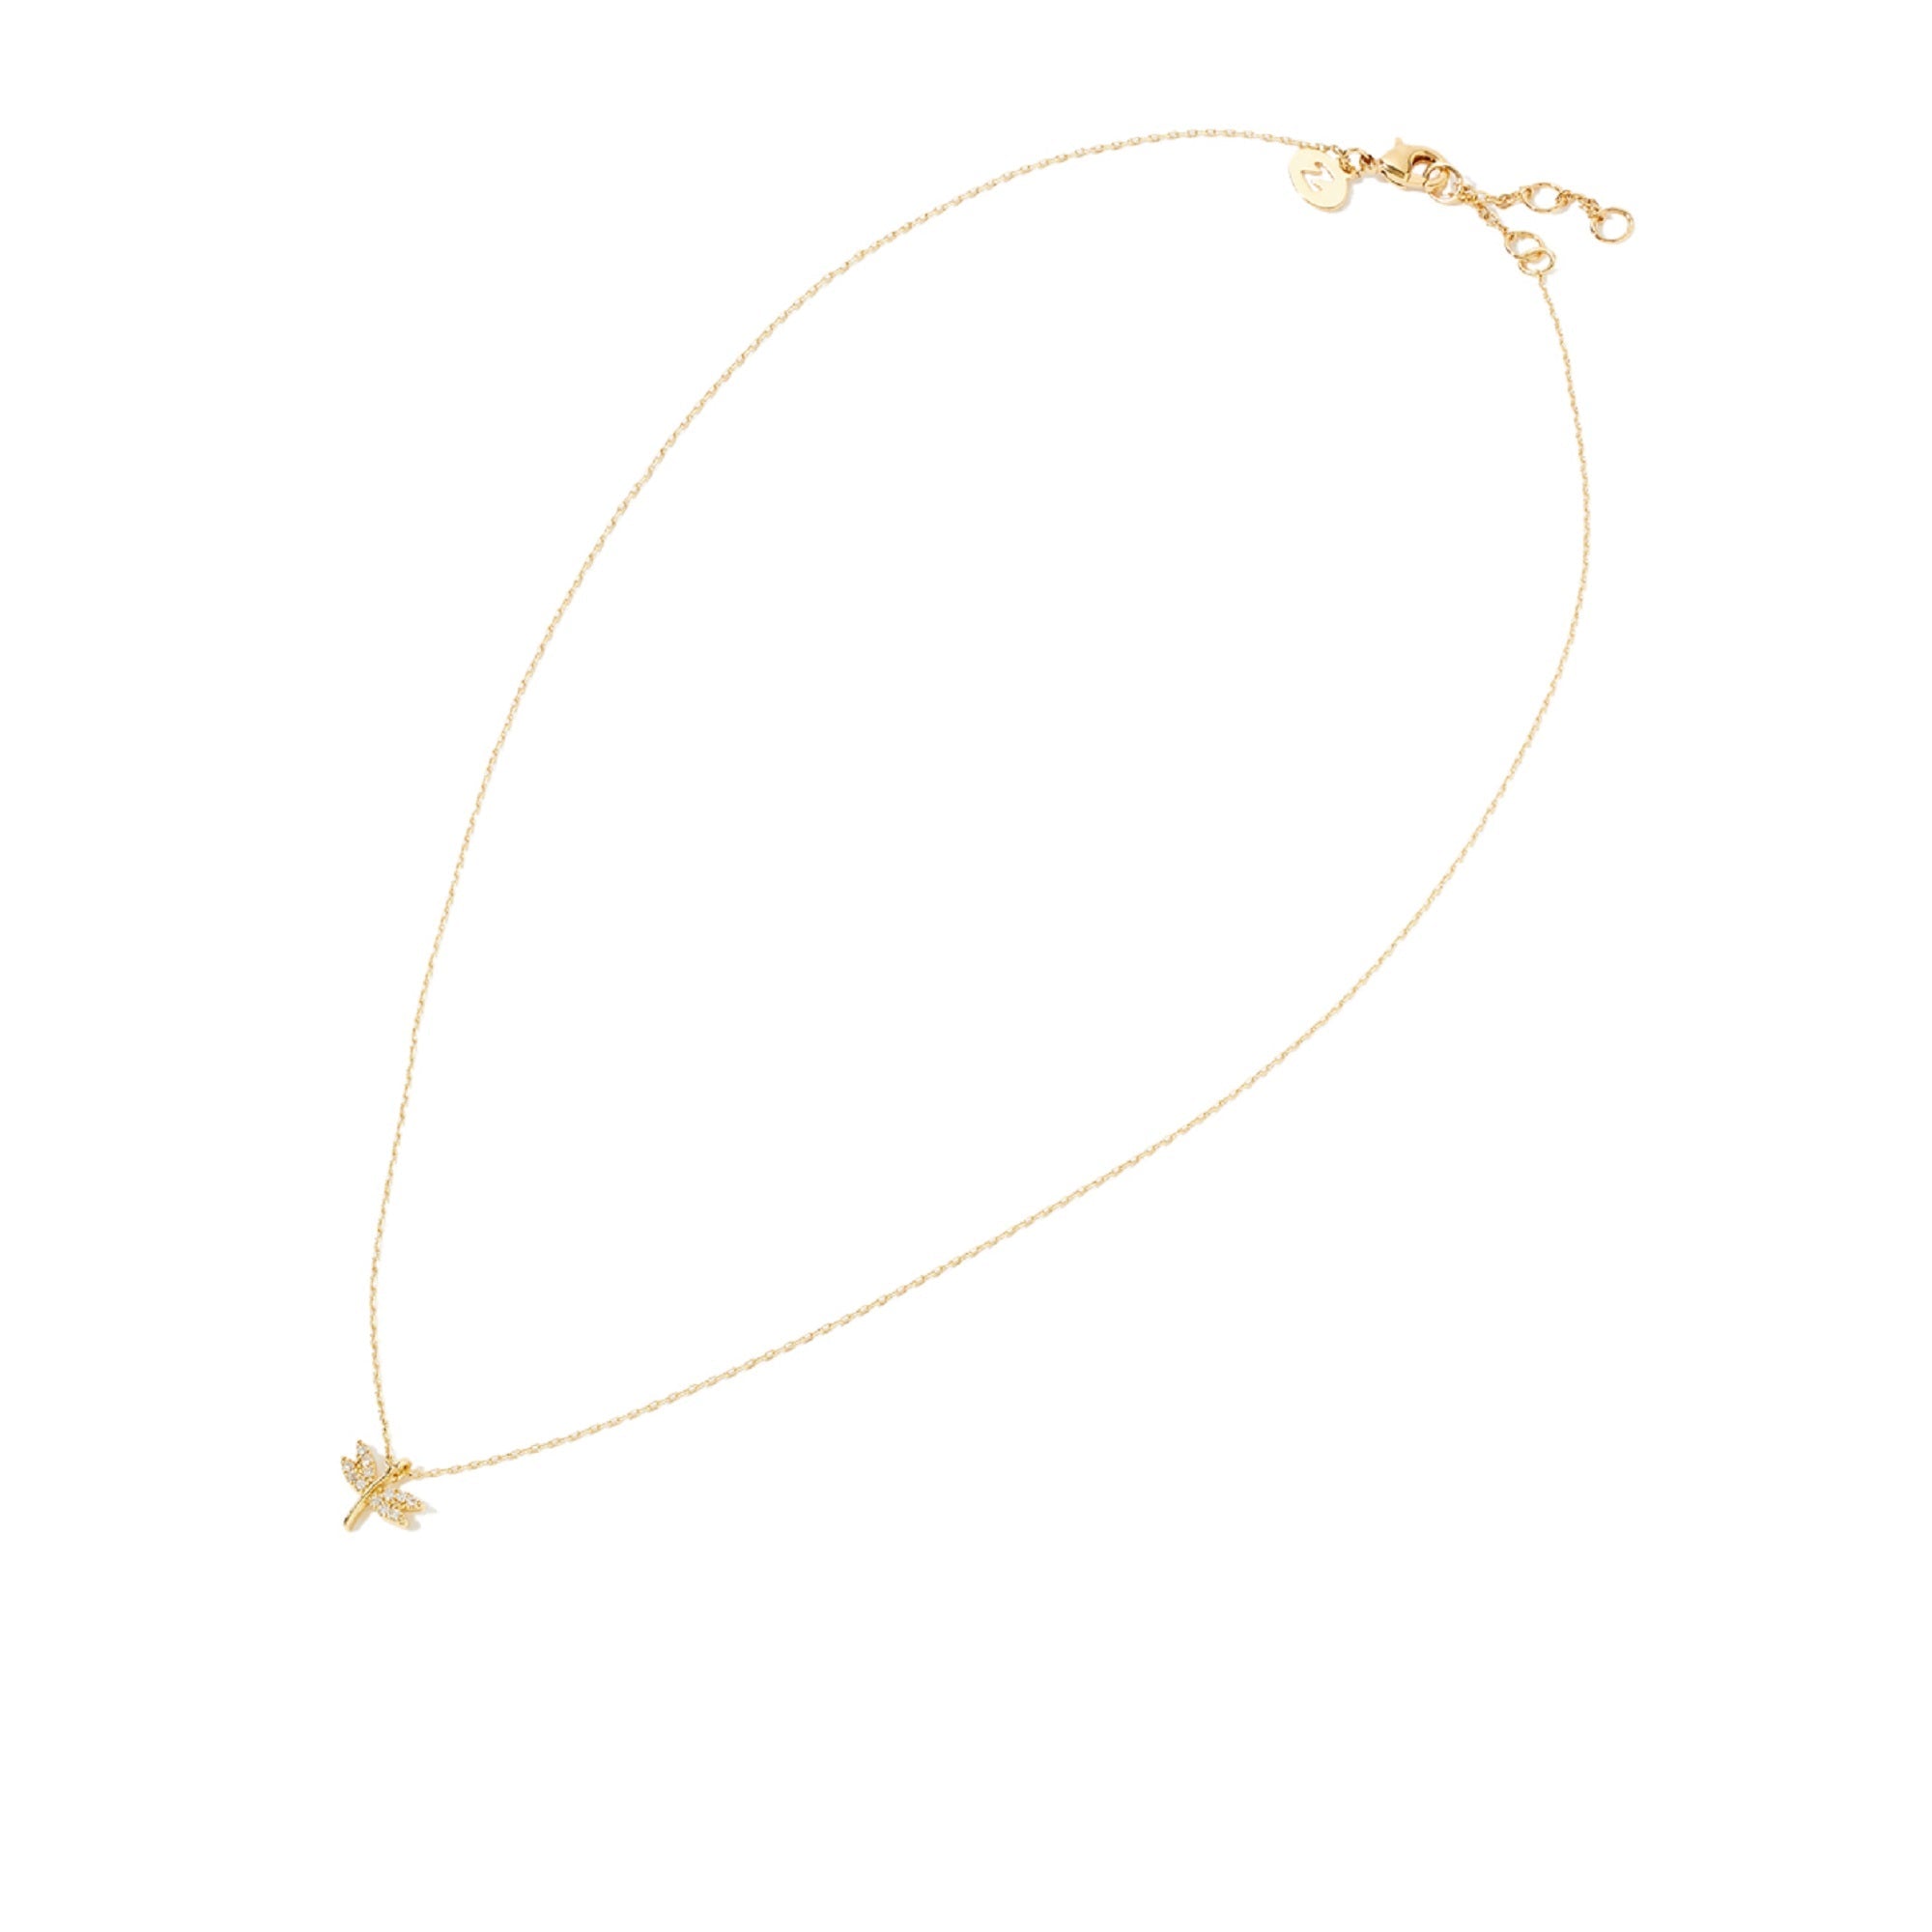 Real Gold Plated Dragonfly Pendant Necklace For Women By Accessorize London